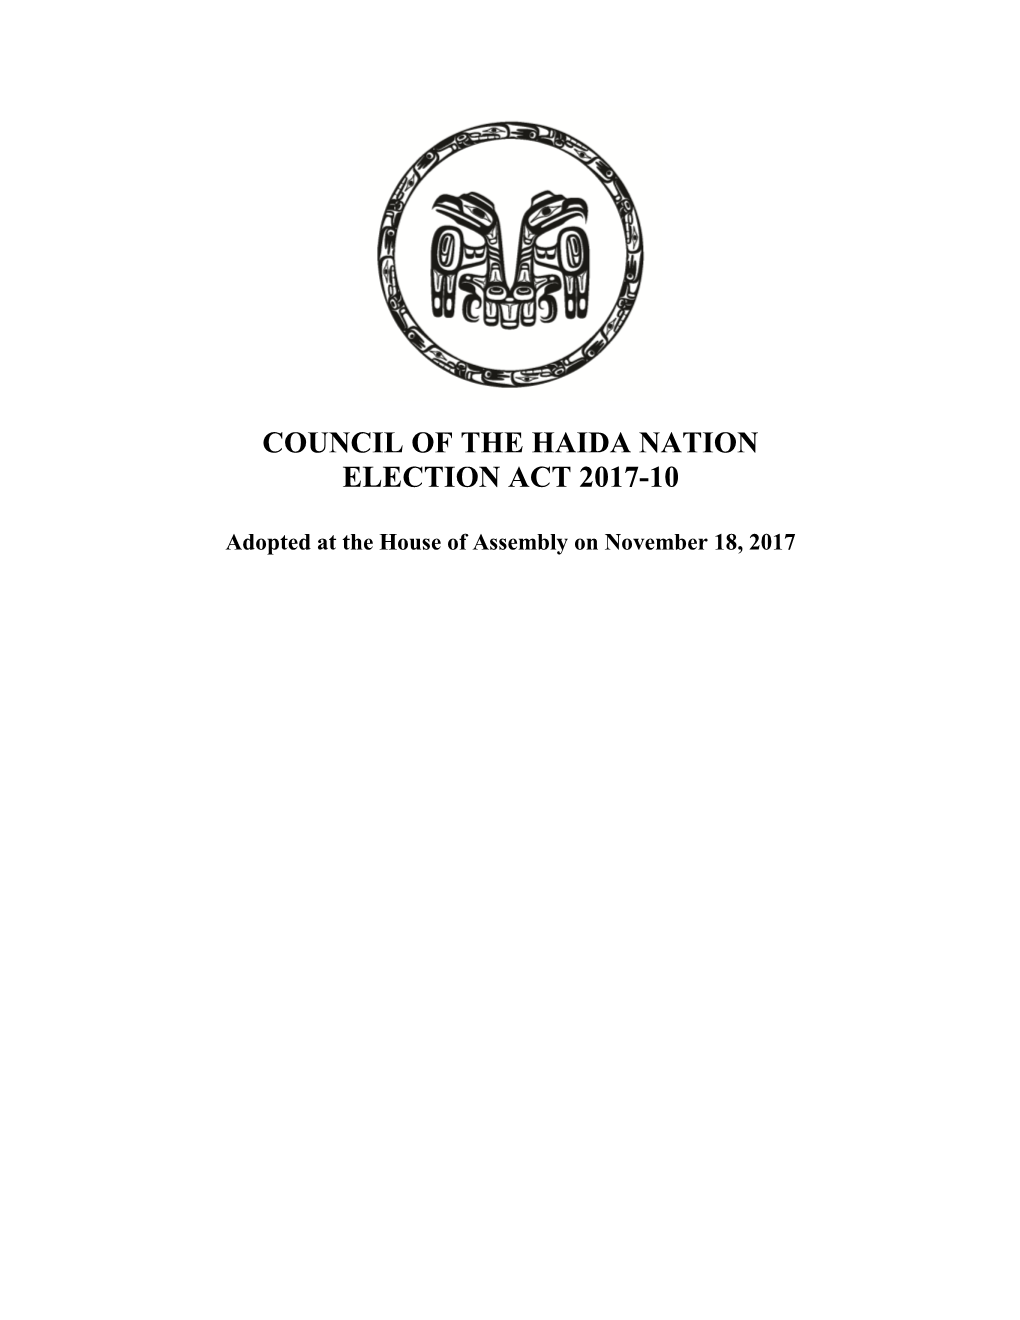 CHN ELECTION ACT 2017-10 Page 2 of 32